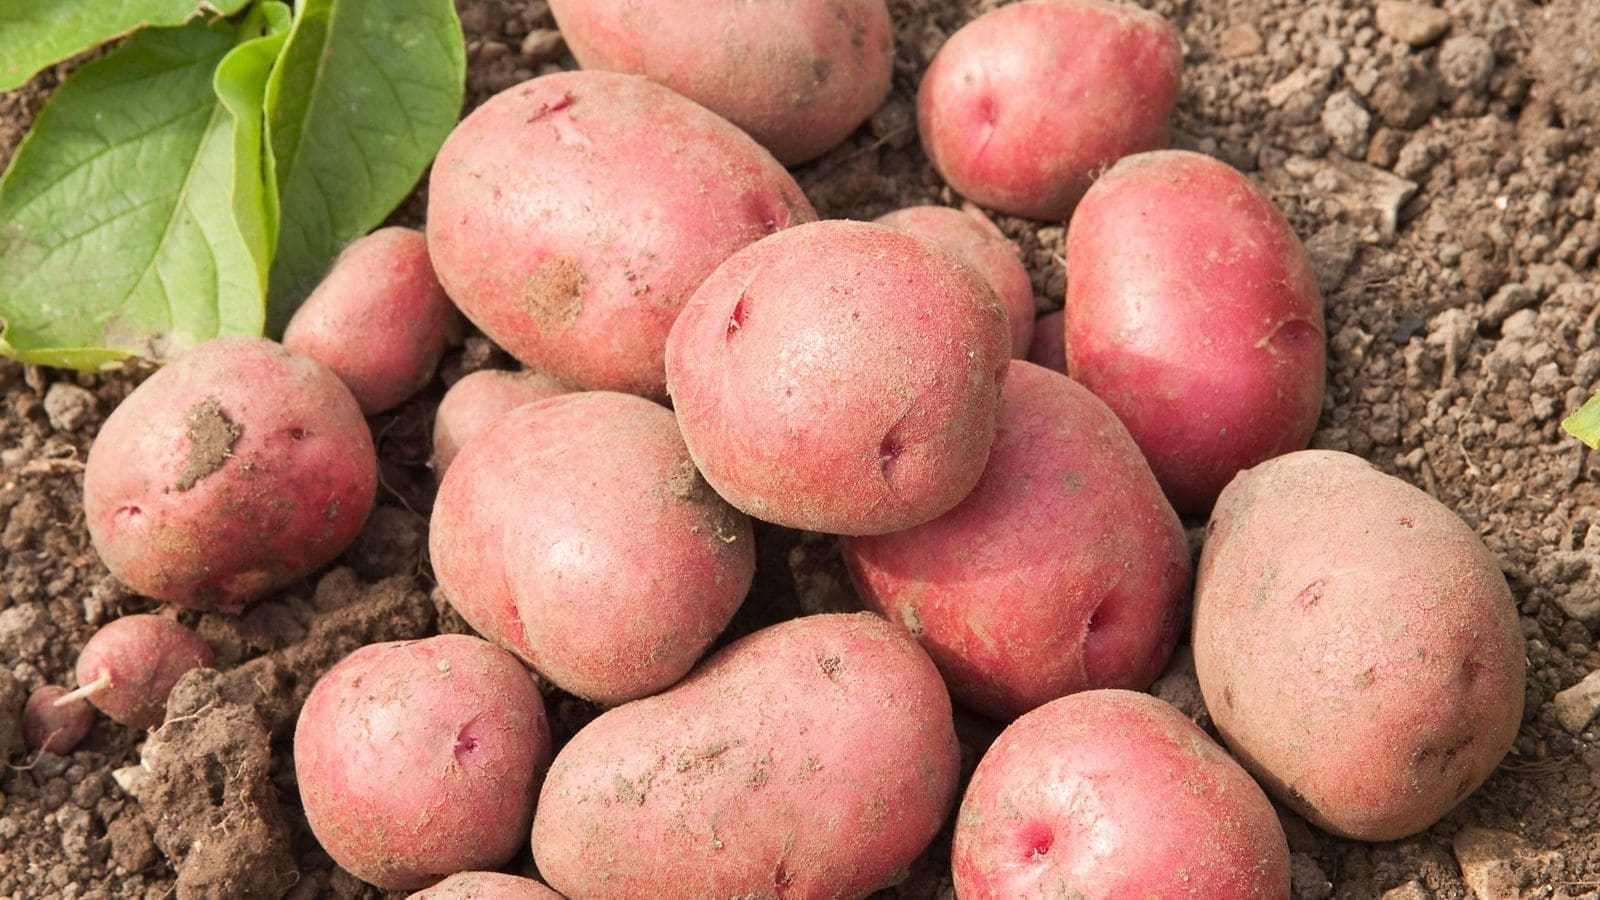 Kenya starts planting Memphis potato variety ahead of planned ban on imported sliced potatoes